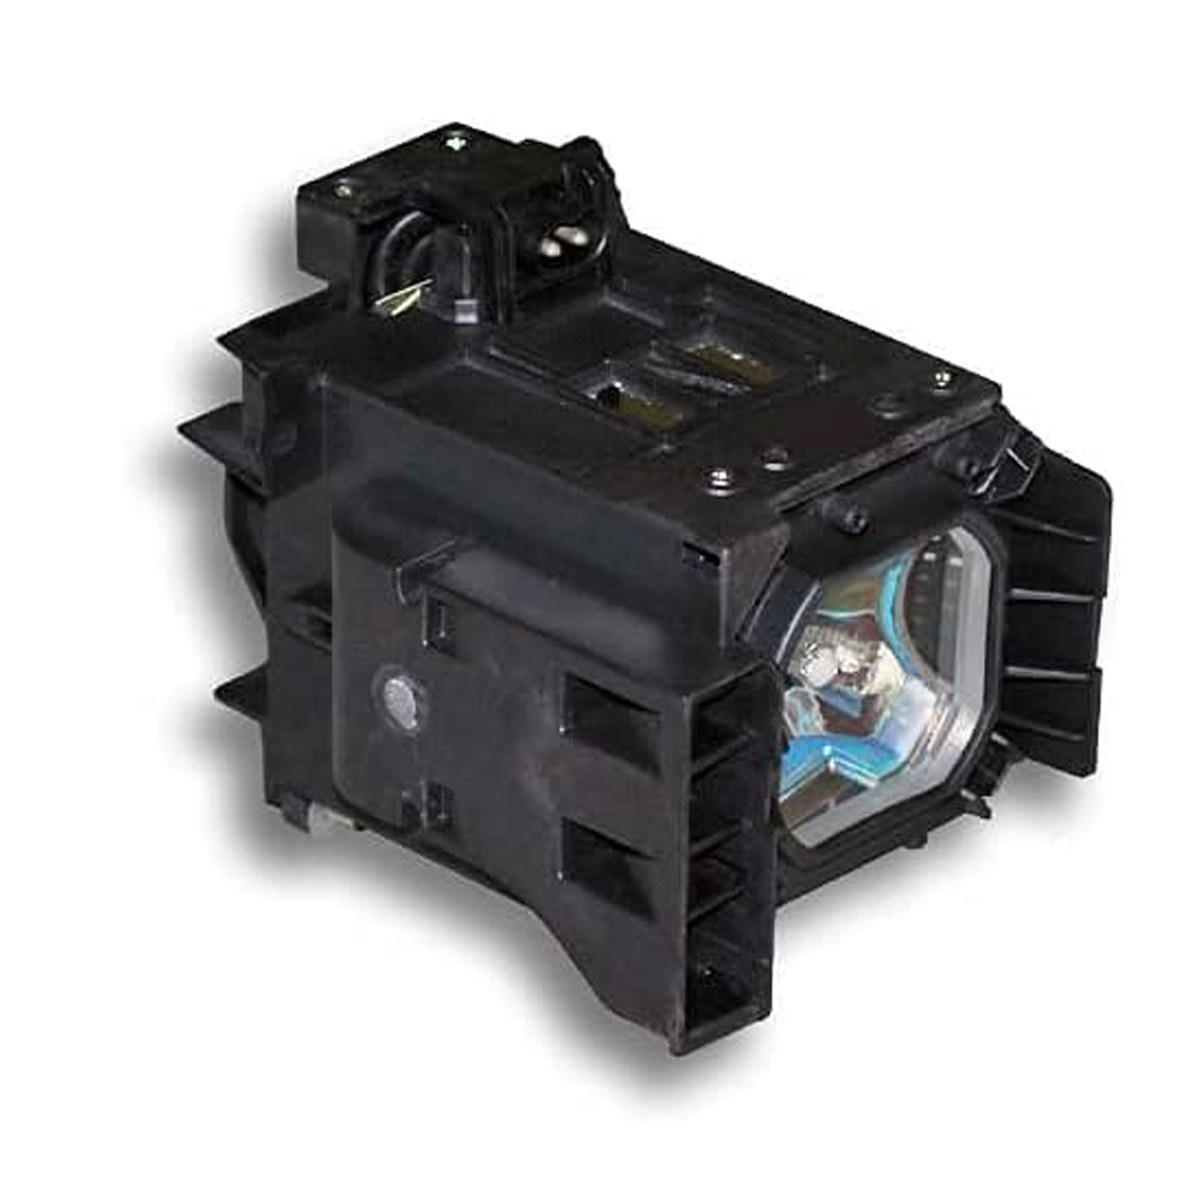 Replacement Projector lamp 456-8806 For Dukane Projector